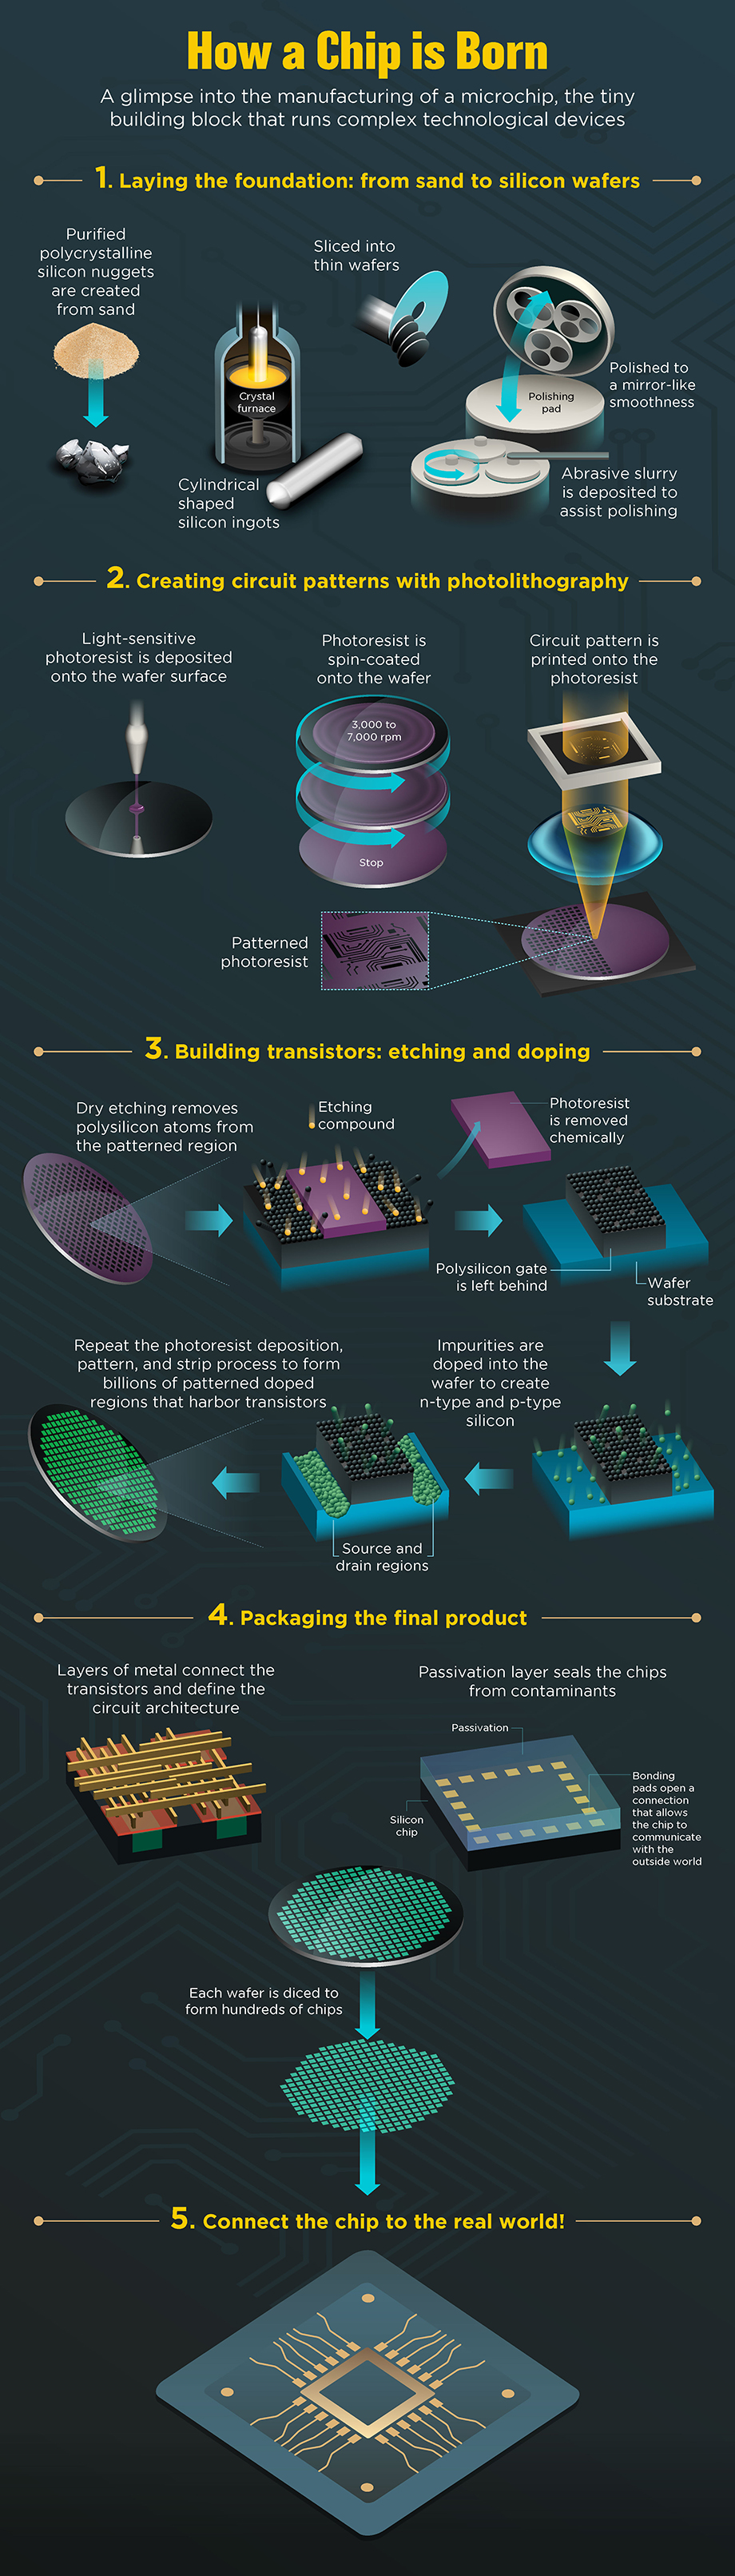 How a Chip is Made infographic